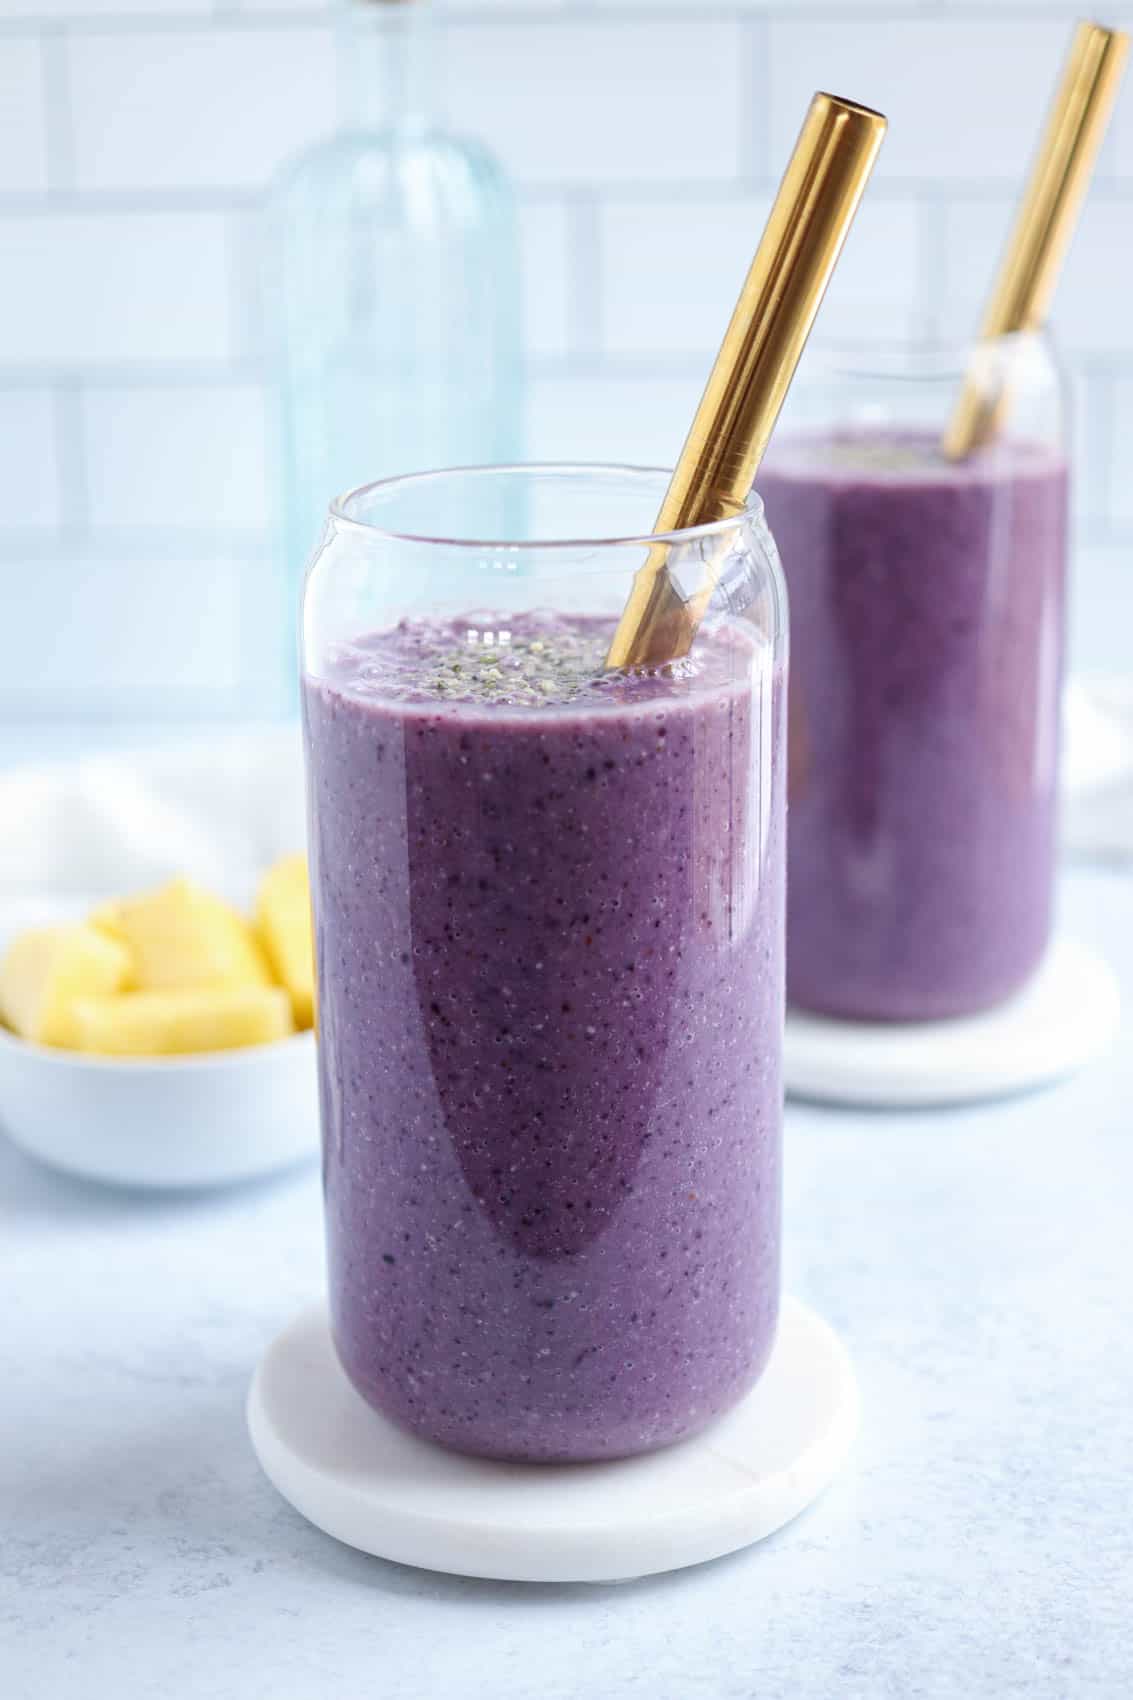 two glasses of blueberry pineapple smoothie with gold straws on light gray surface.